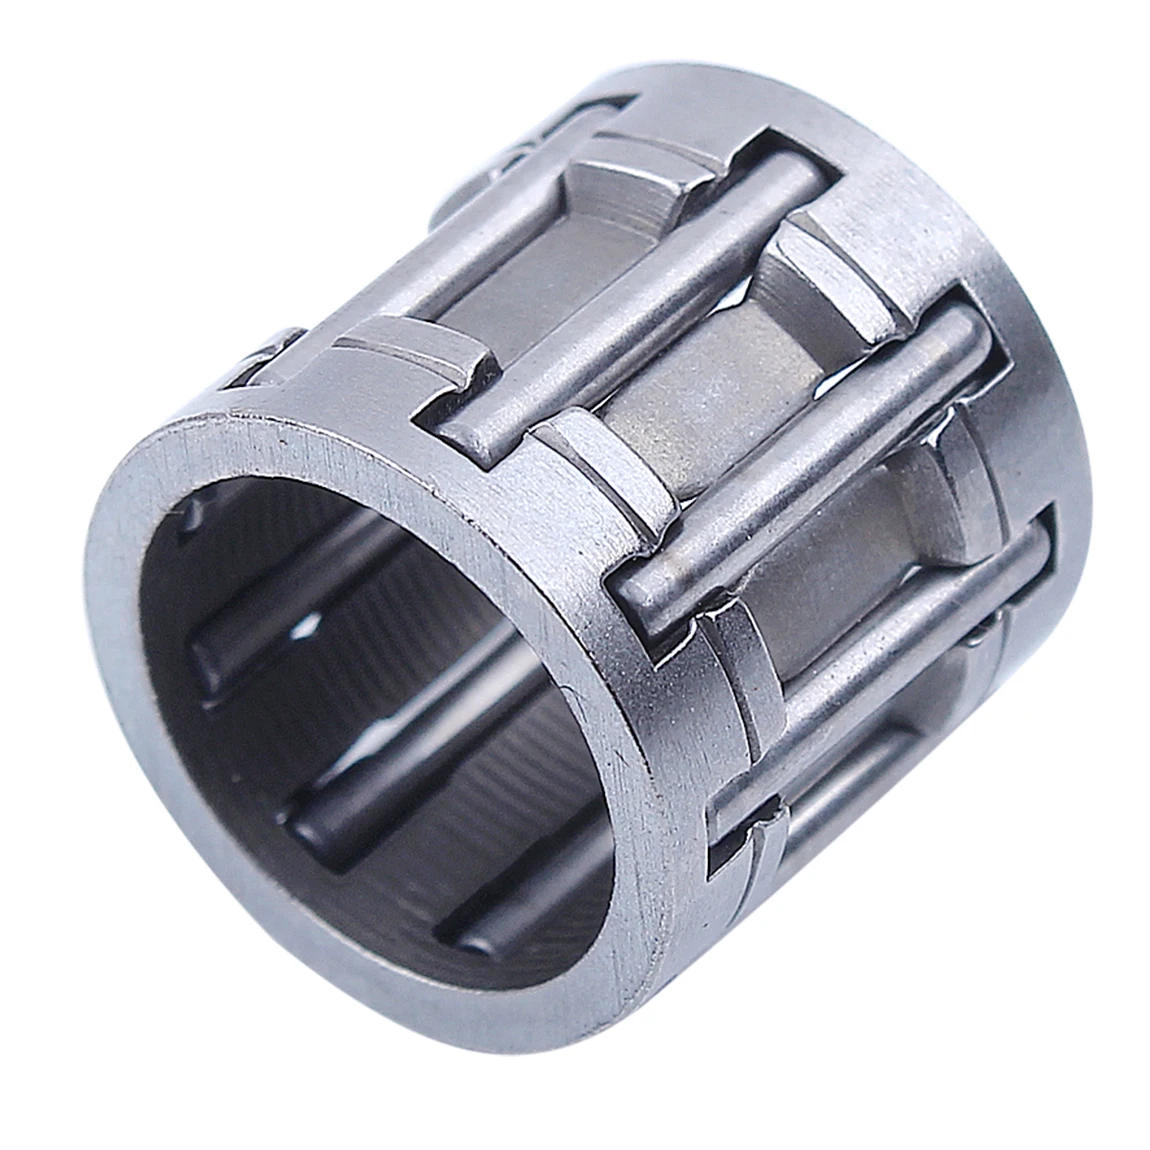 

Chainsaw Clutch Needle Bearing For STIHL MS250 MS230 MS210 FS120 FS250 FS200 FS400 FS450 FS480 FS220 FS300 FS350 Parts